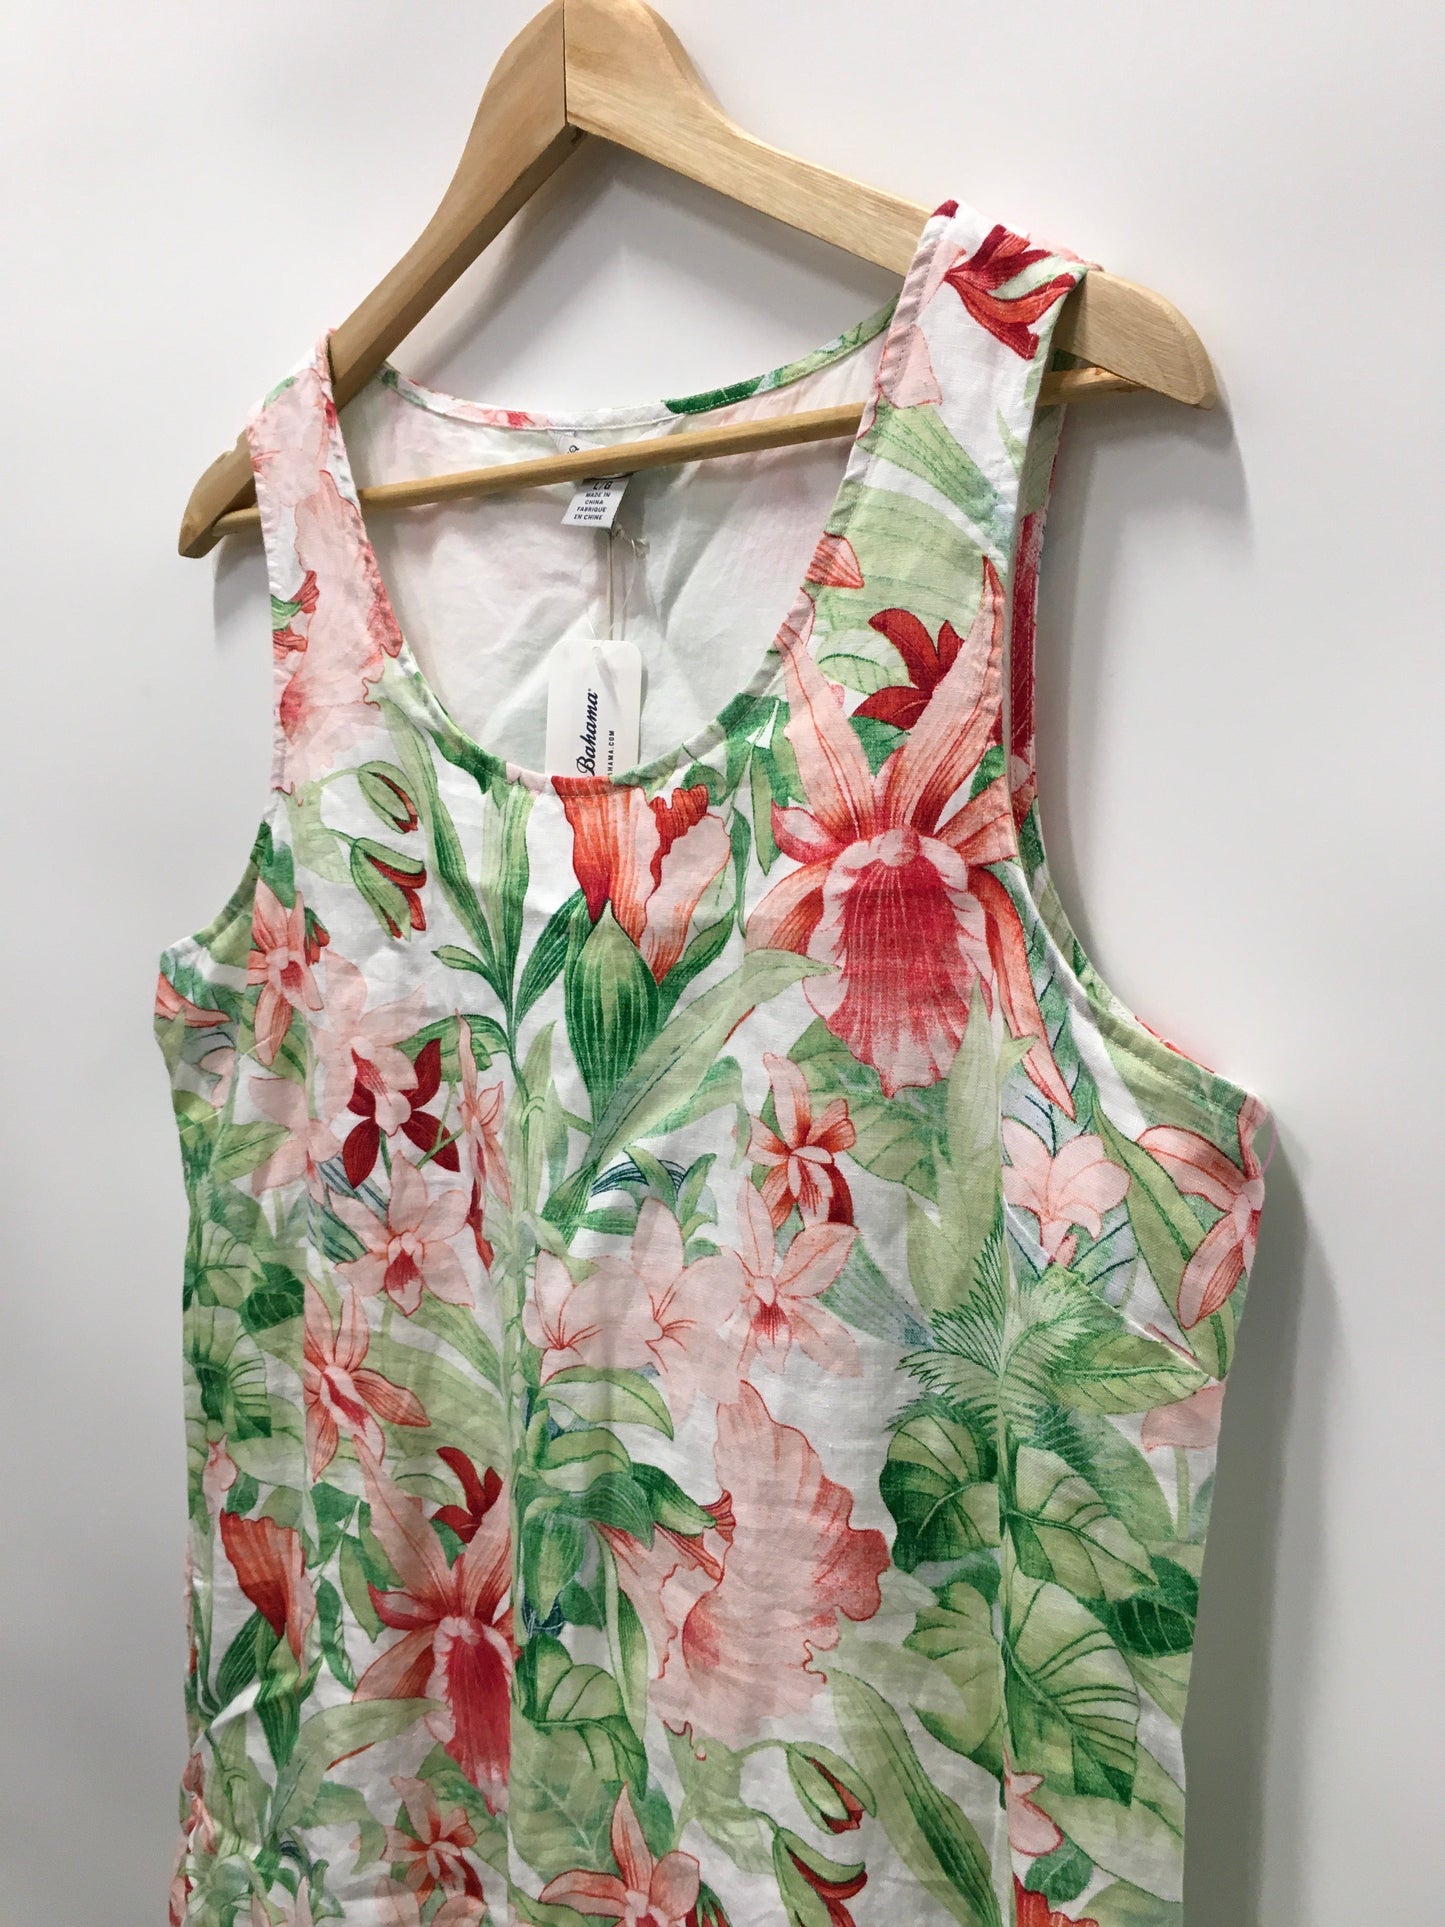 Floral Print Dress Casual Short Tommy Bahama, Size L